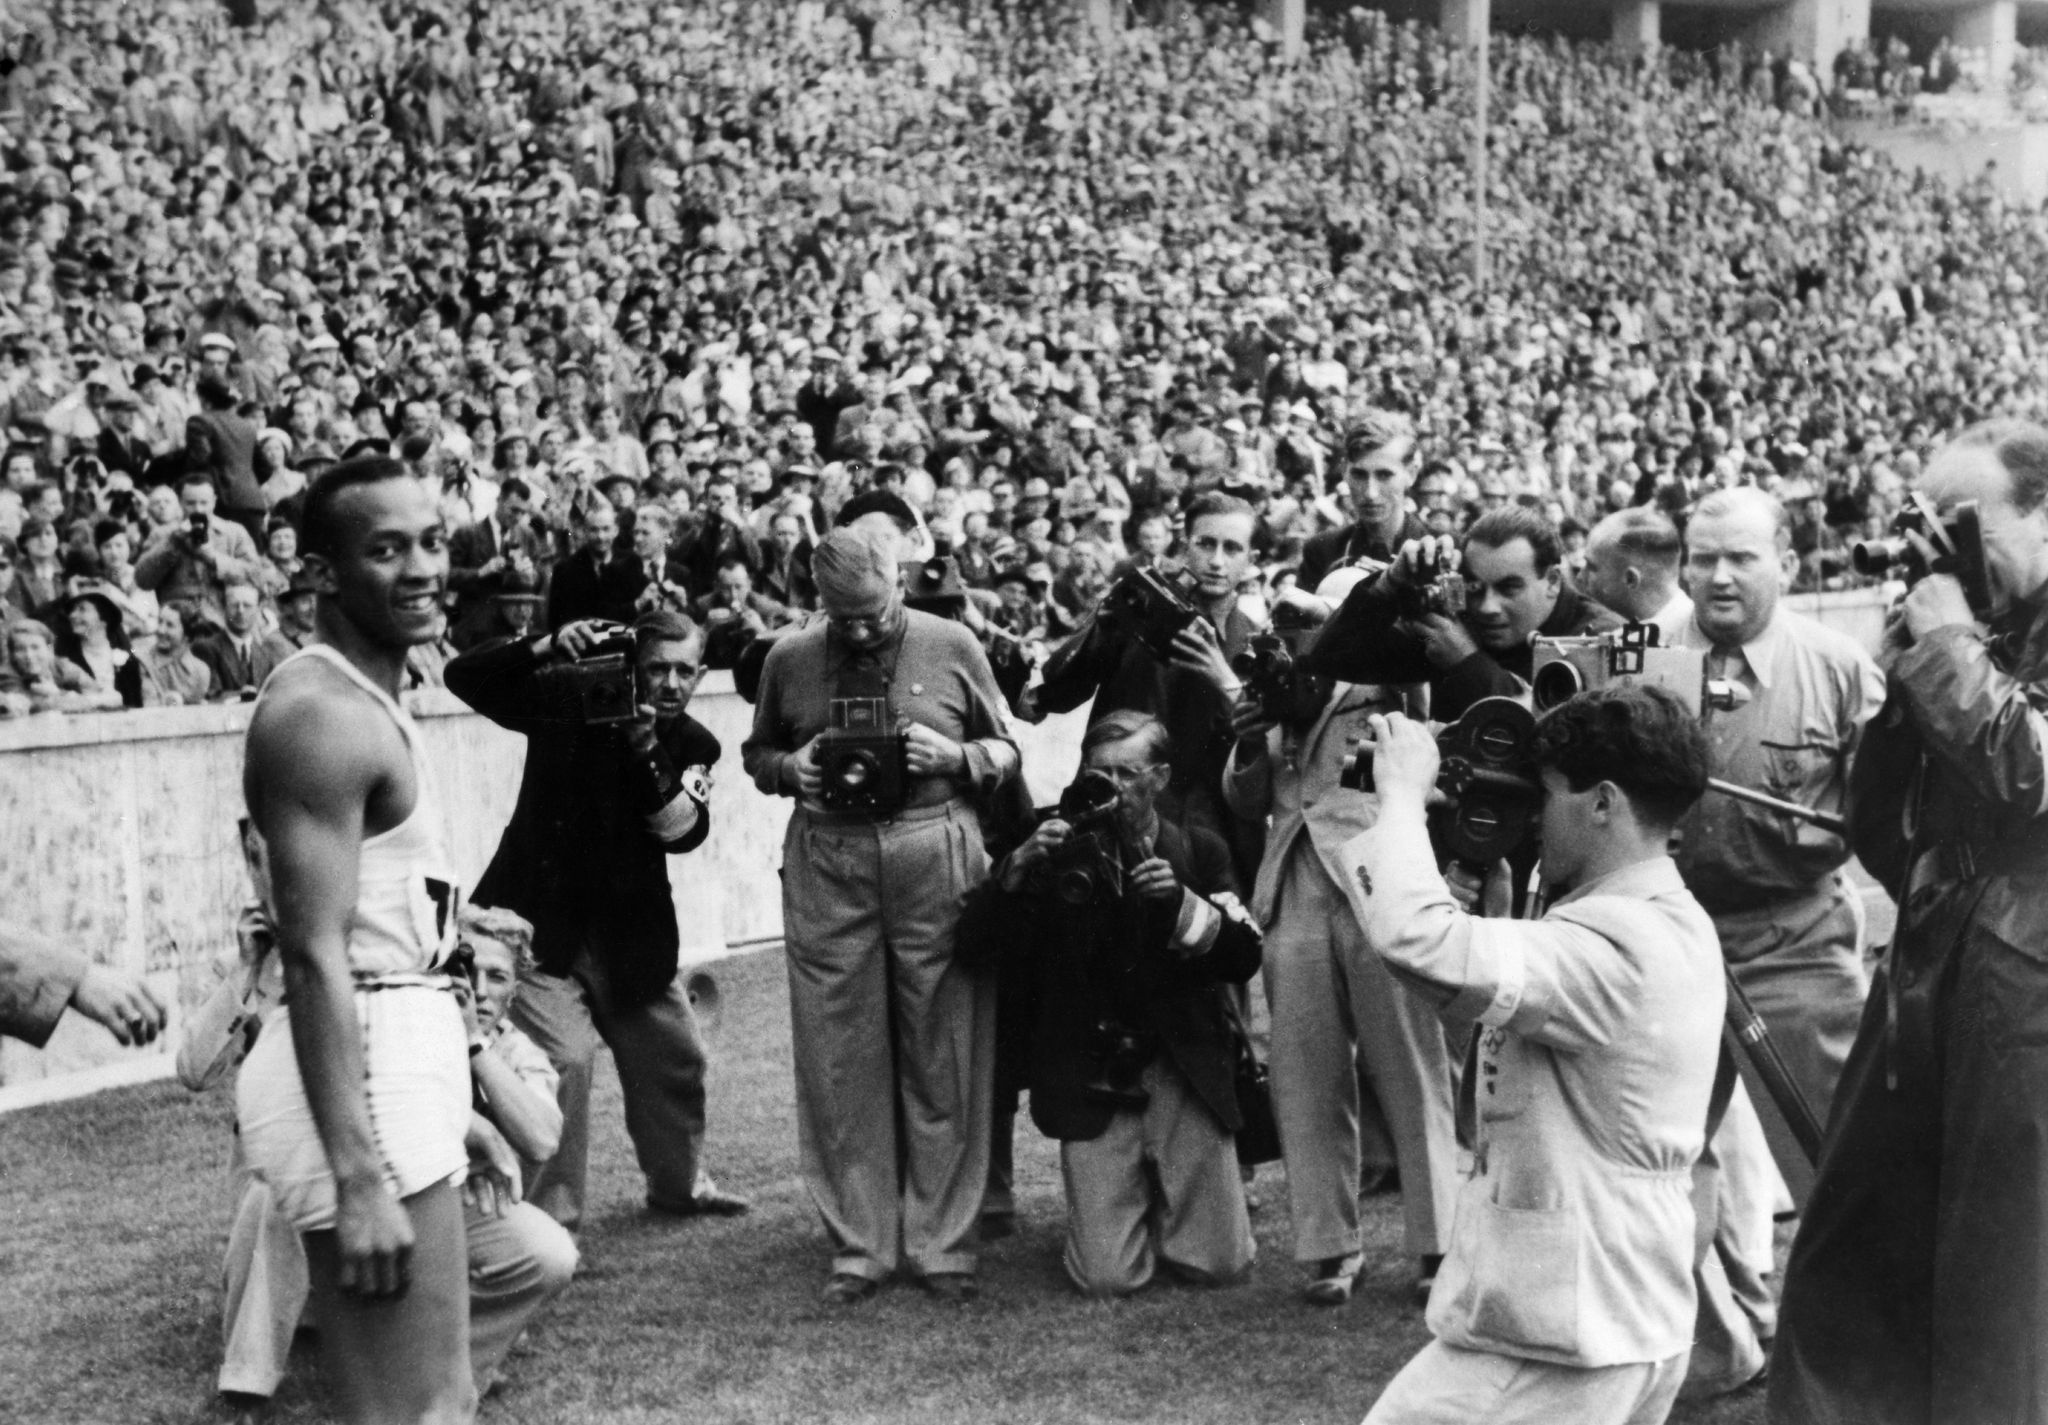 germany out jesse owens james cleveland owens,   12091913 31031980  , us american track and field athlete, won 4 gold medals at the summer olympics in berlin in 1936, summer olympics in berlin in august 1936 owens is surrounded by press photographers after winning the 100m sprint, among them is heinrich von der becke c, kneeling  photo by von der becke  ullstein bild via getty images